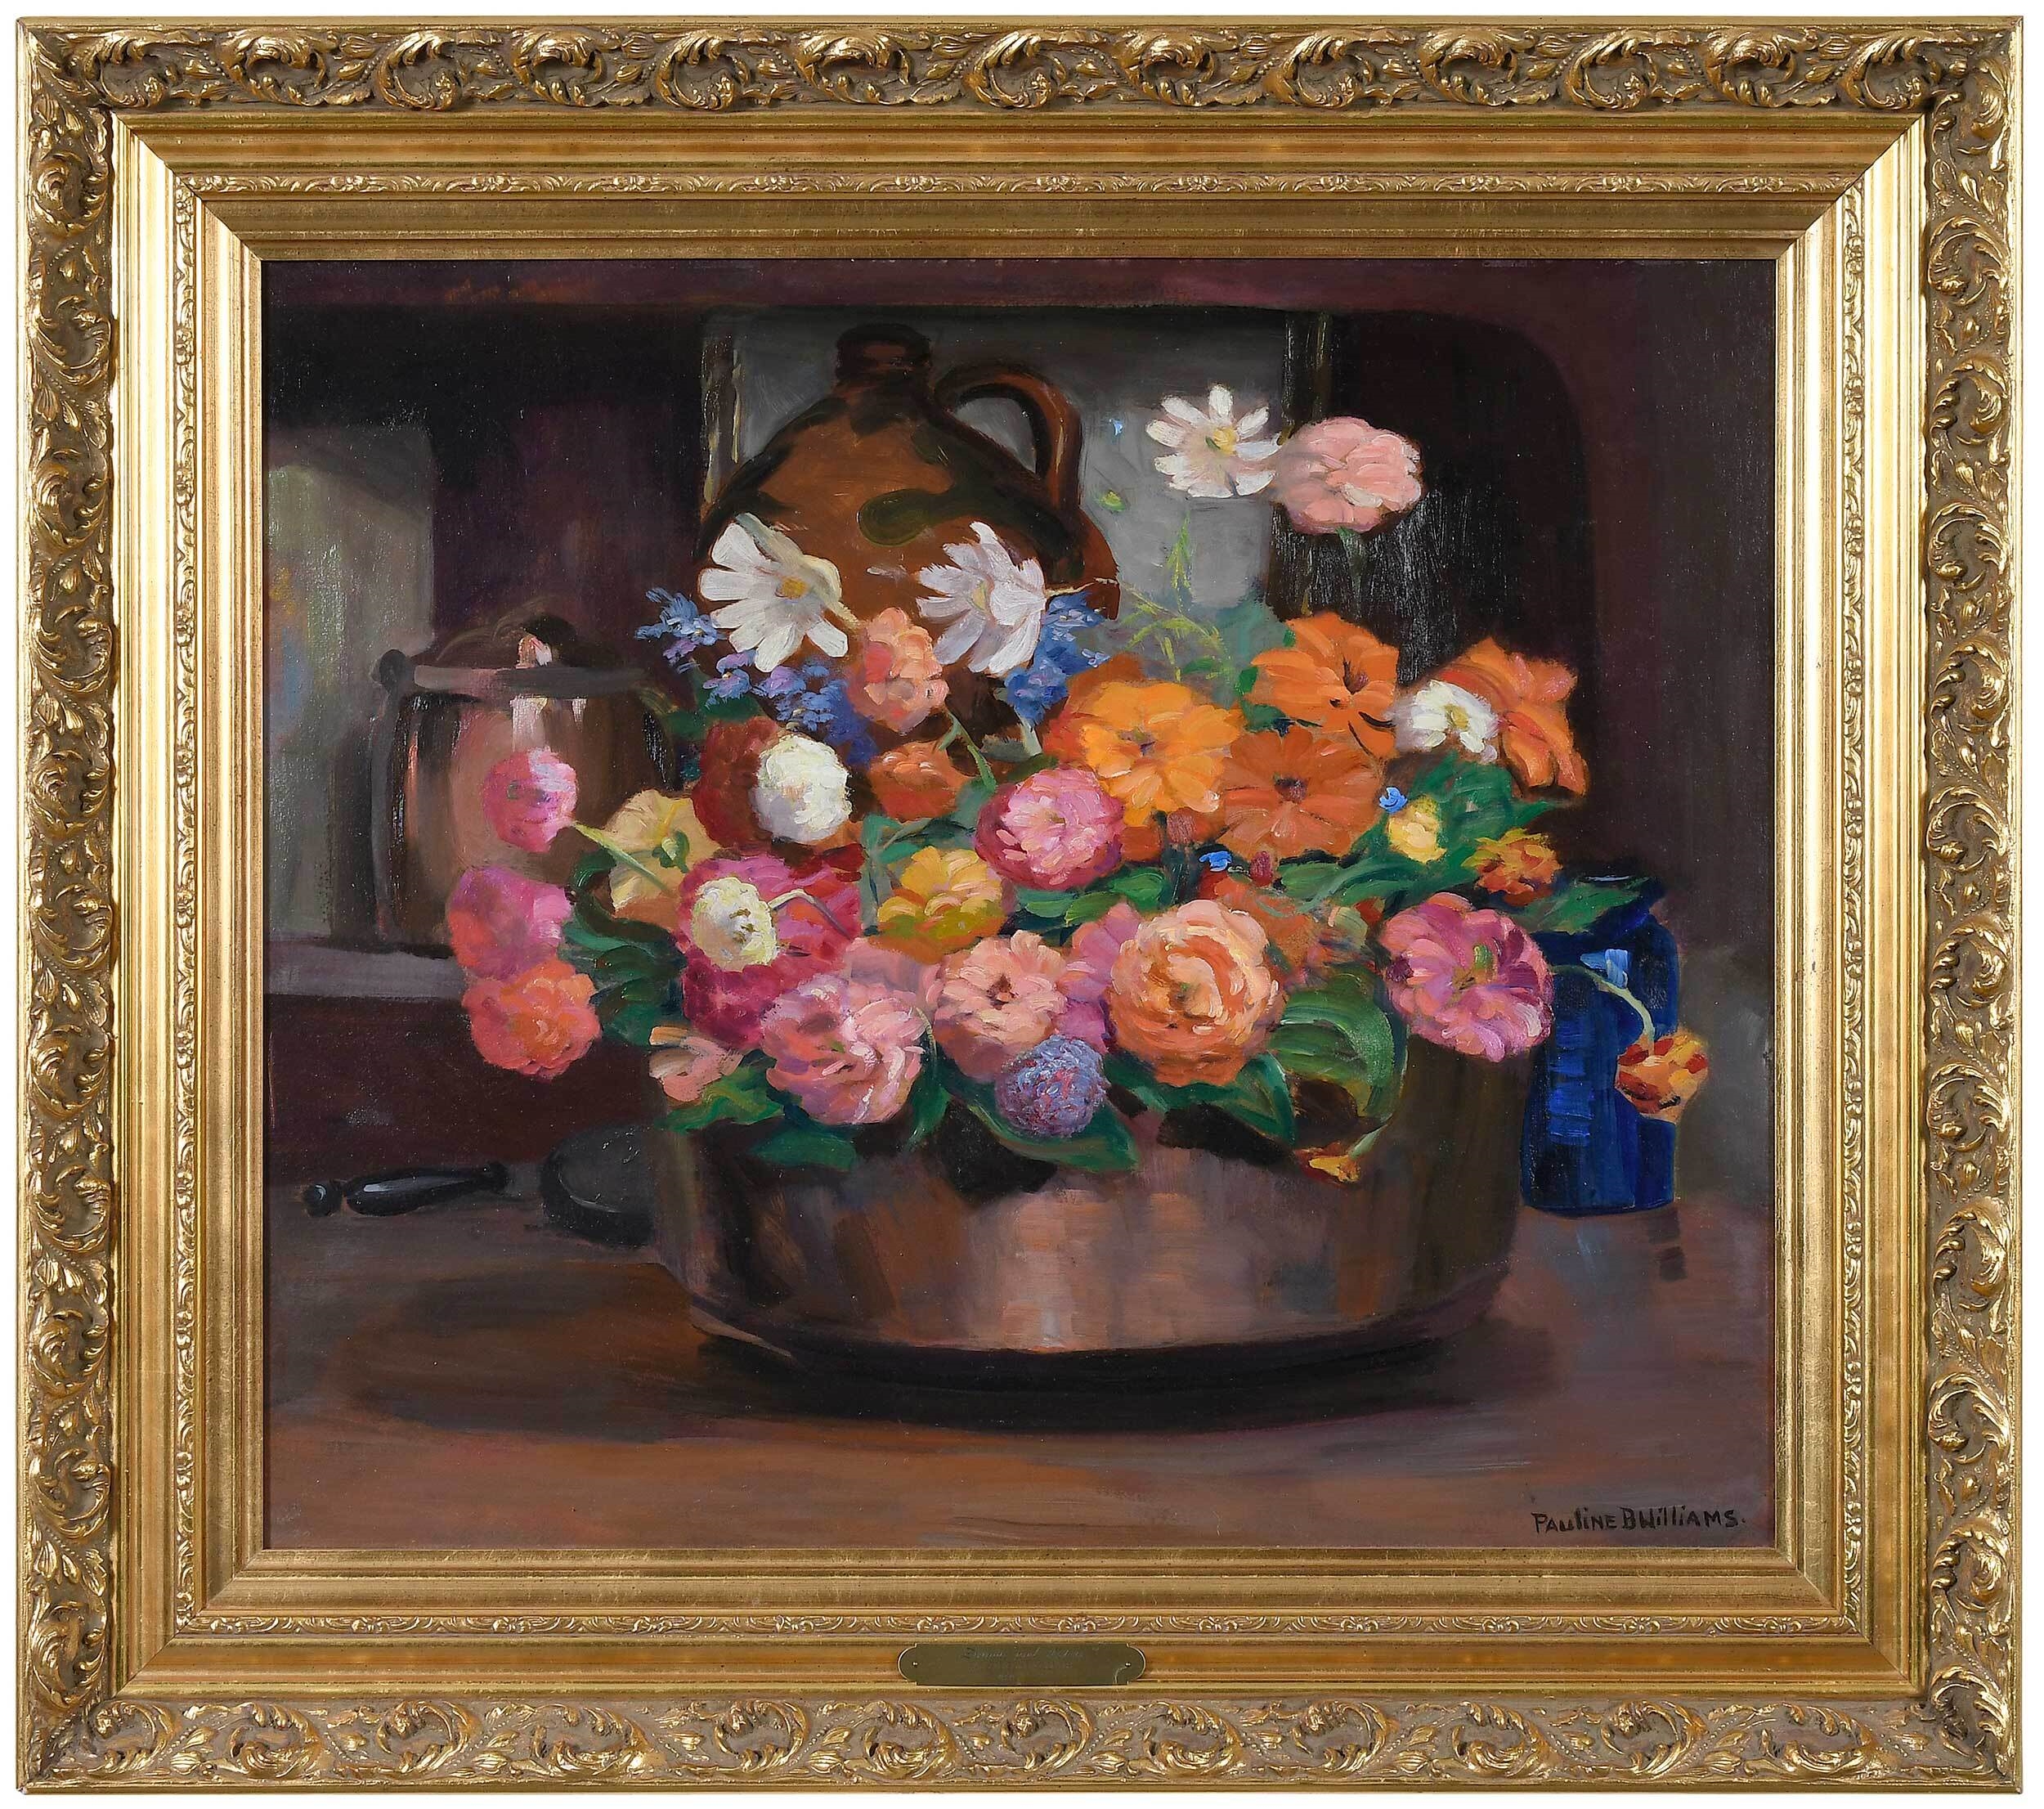 Zinnias and Asters by Pauline Williams